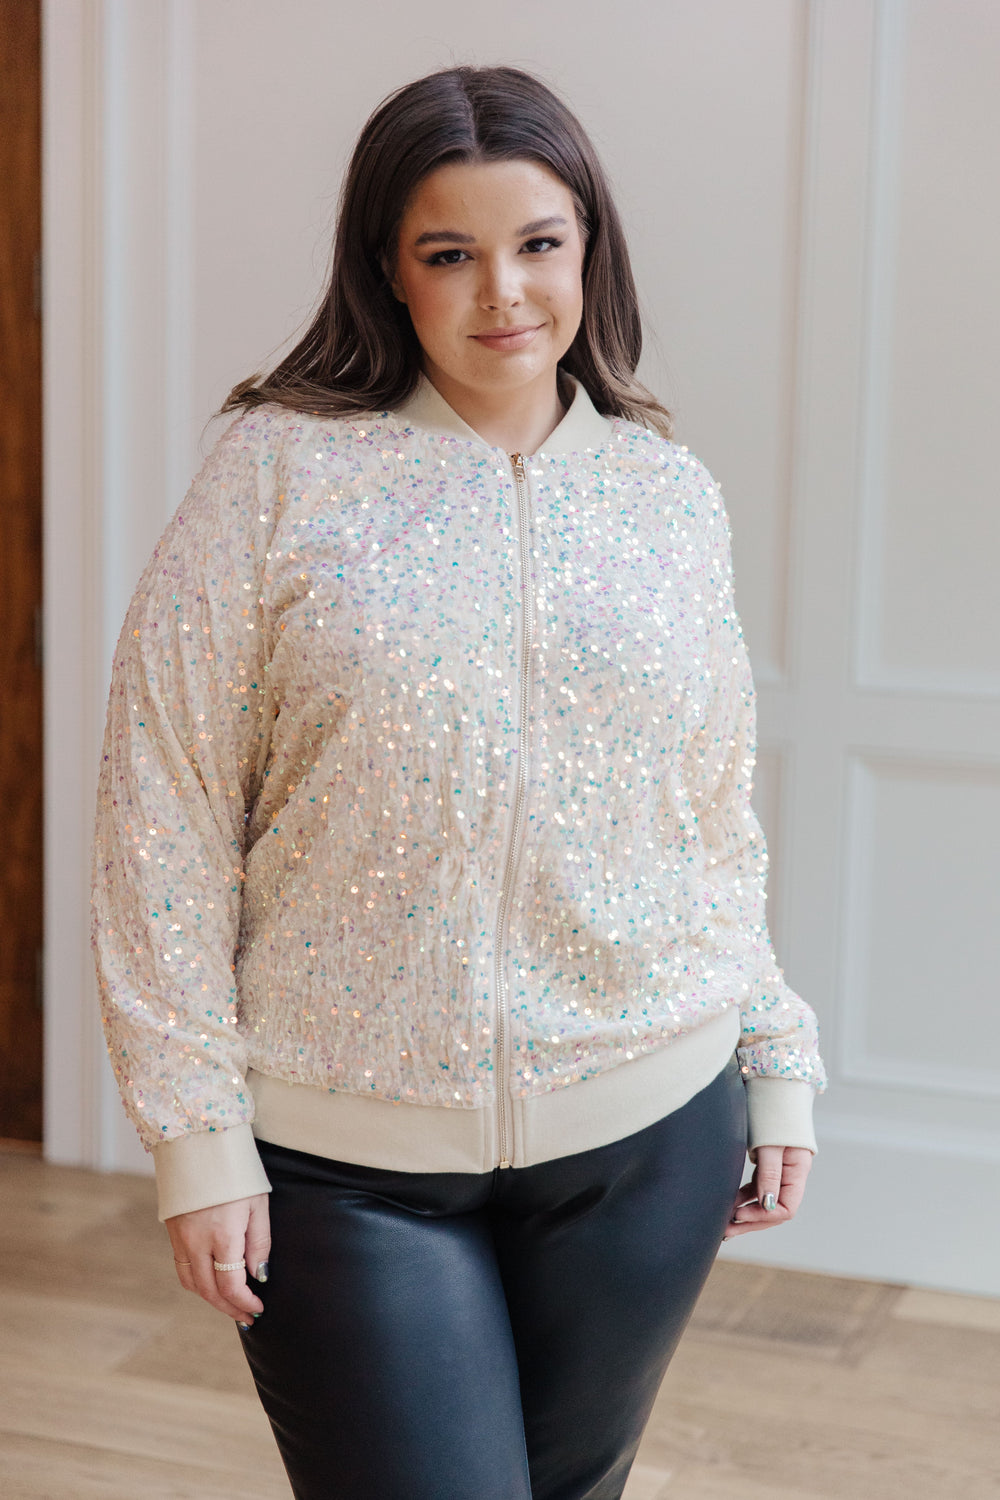 Glitter Bomb Sequin Bomber Jacket-220 Beauty/Gift-Inspired by Justeen-Women's Clothing Boutique in Chicago, Illinois